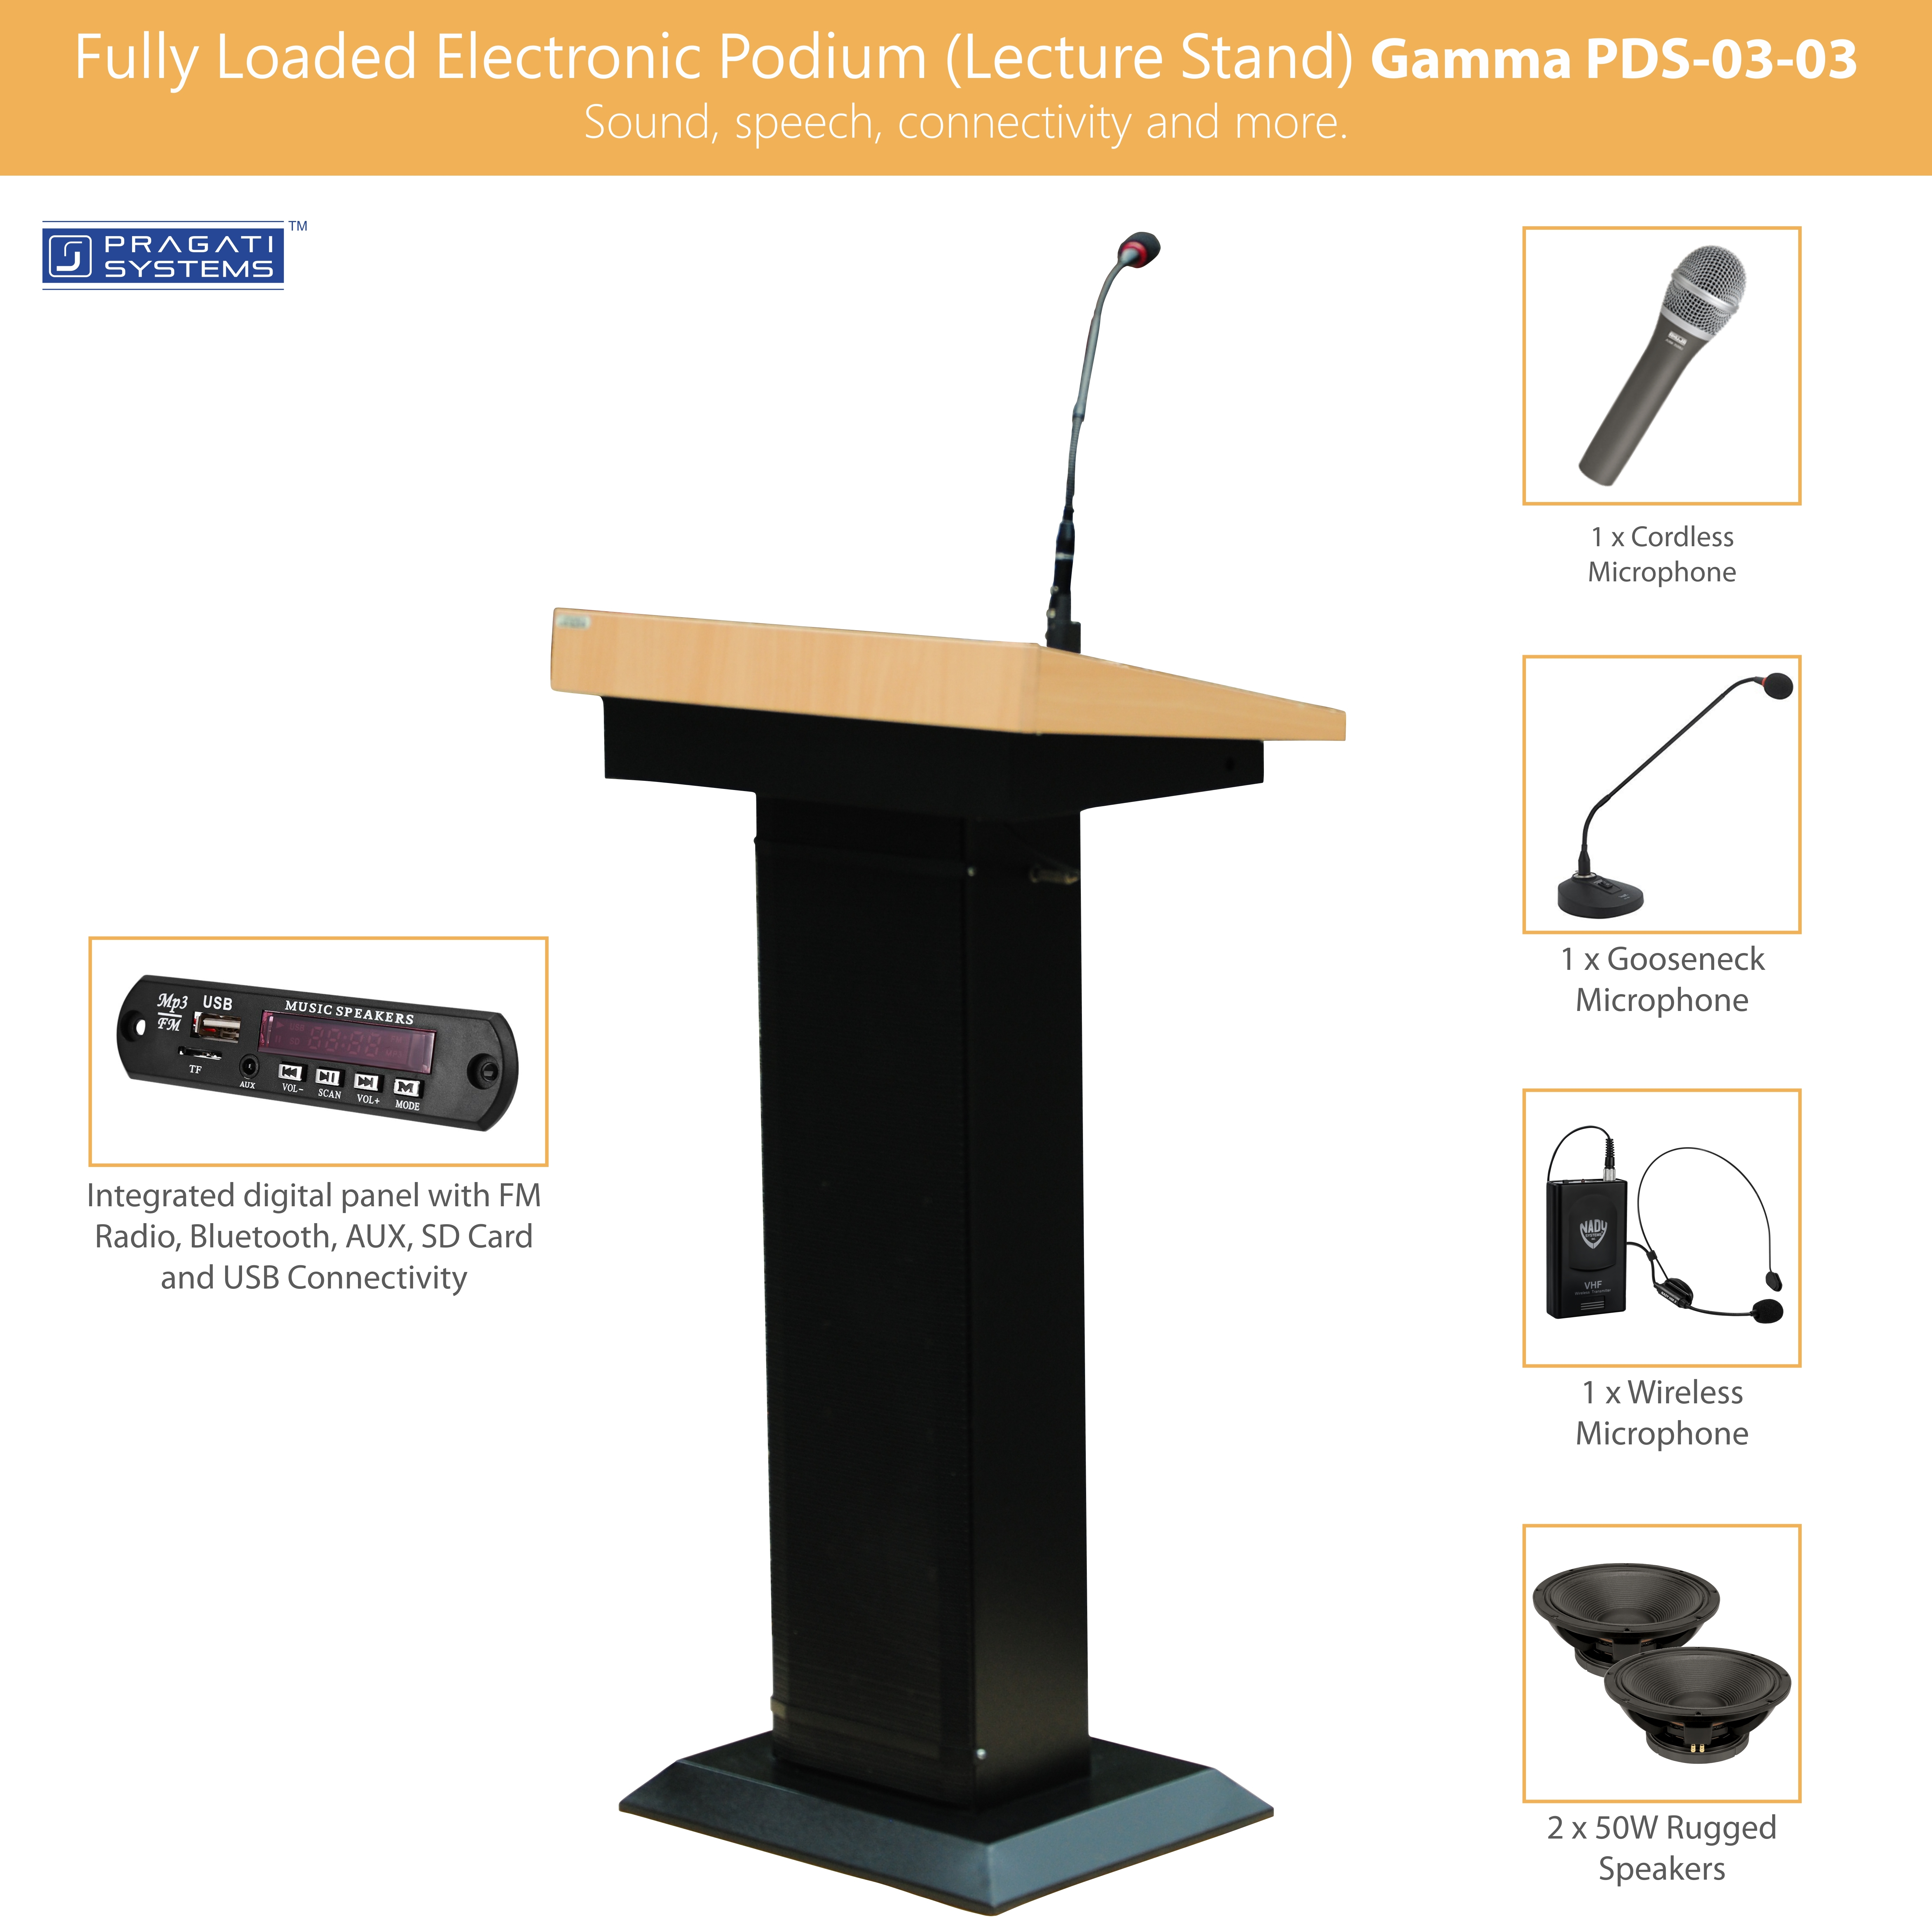 Fully Loaded Digital Podium (Lecture Stand)